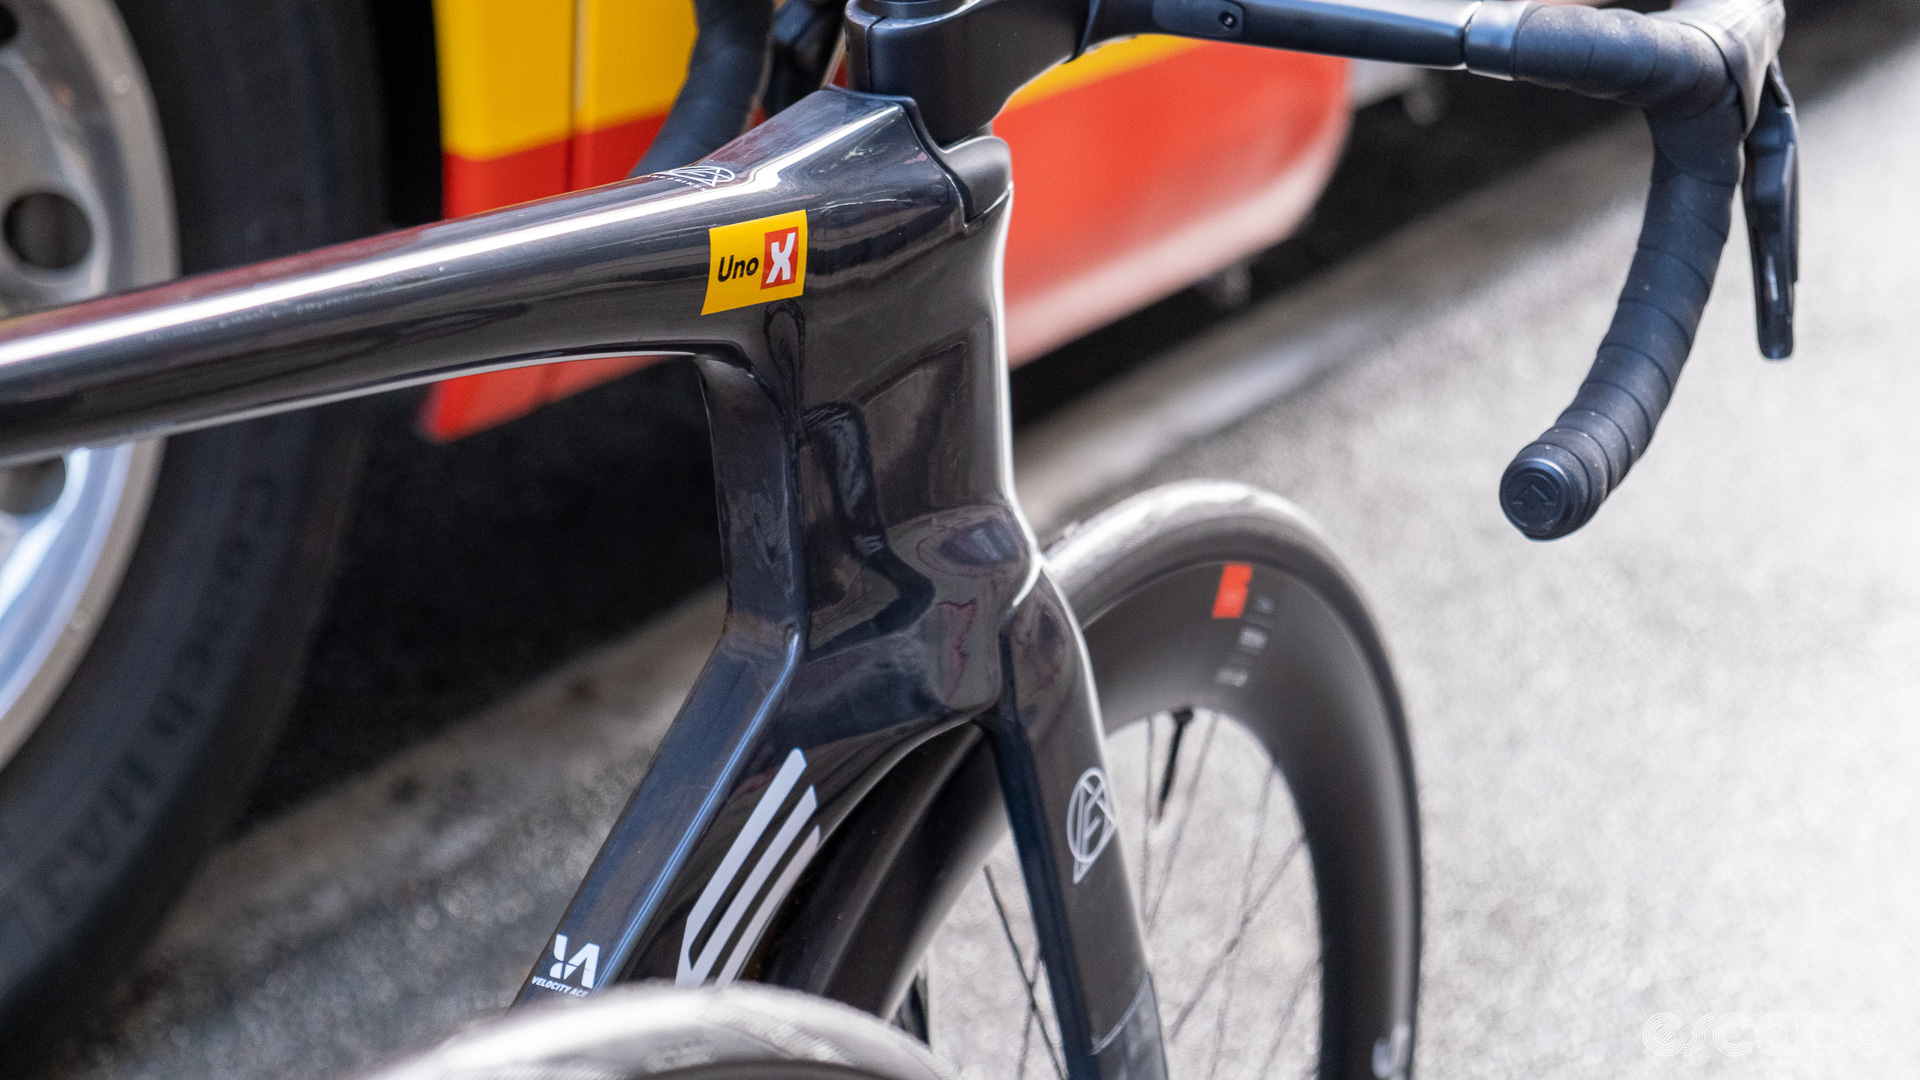 The image shows the side and rear of the head tube on the new Dare aero bike.